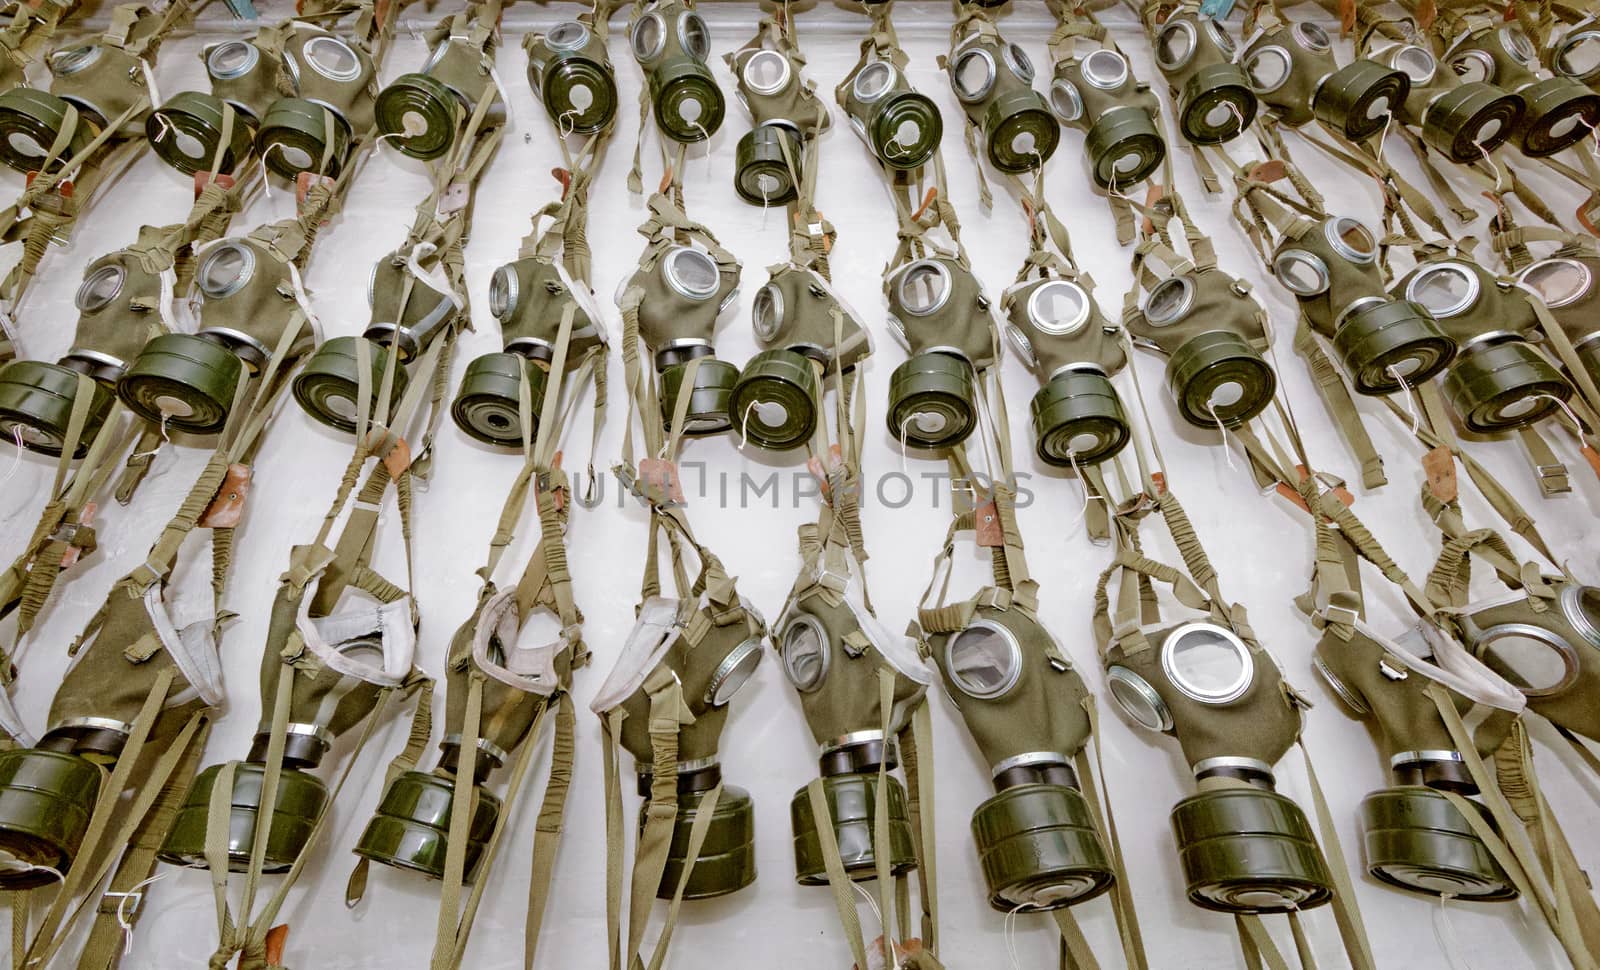 old military gas masks hanging on each other